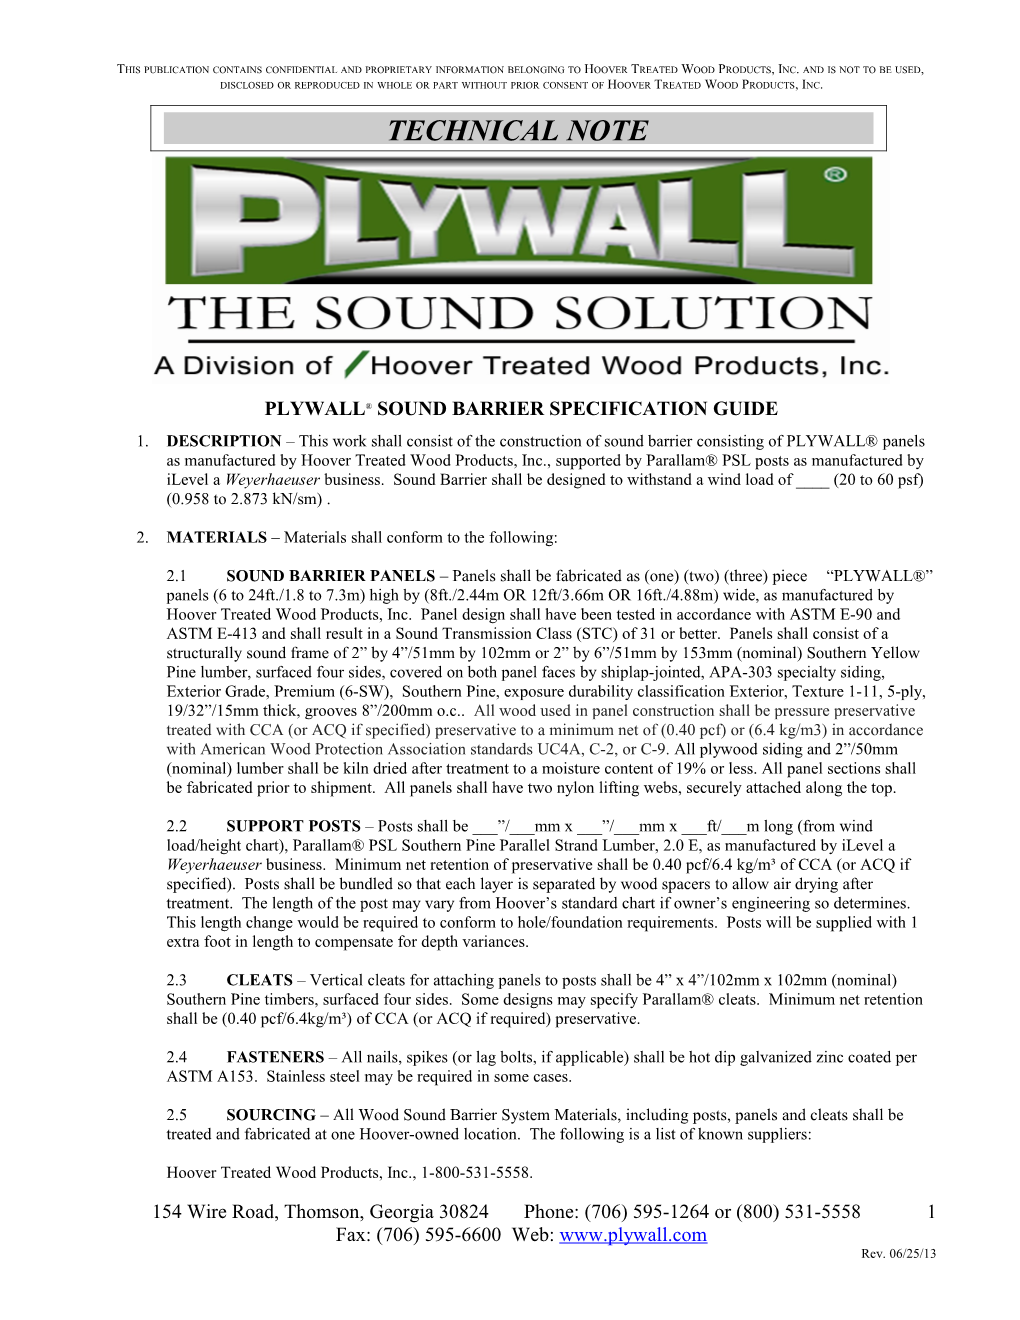 Plywall Sound Barrier Specification Guide